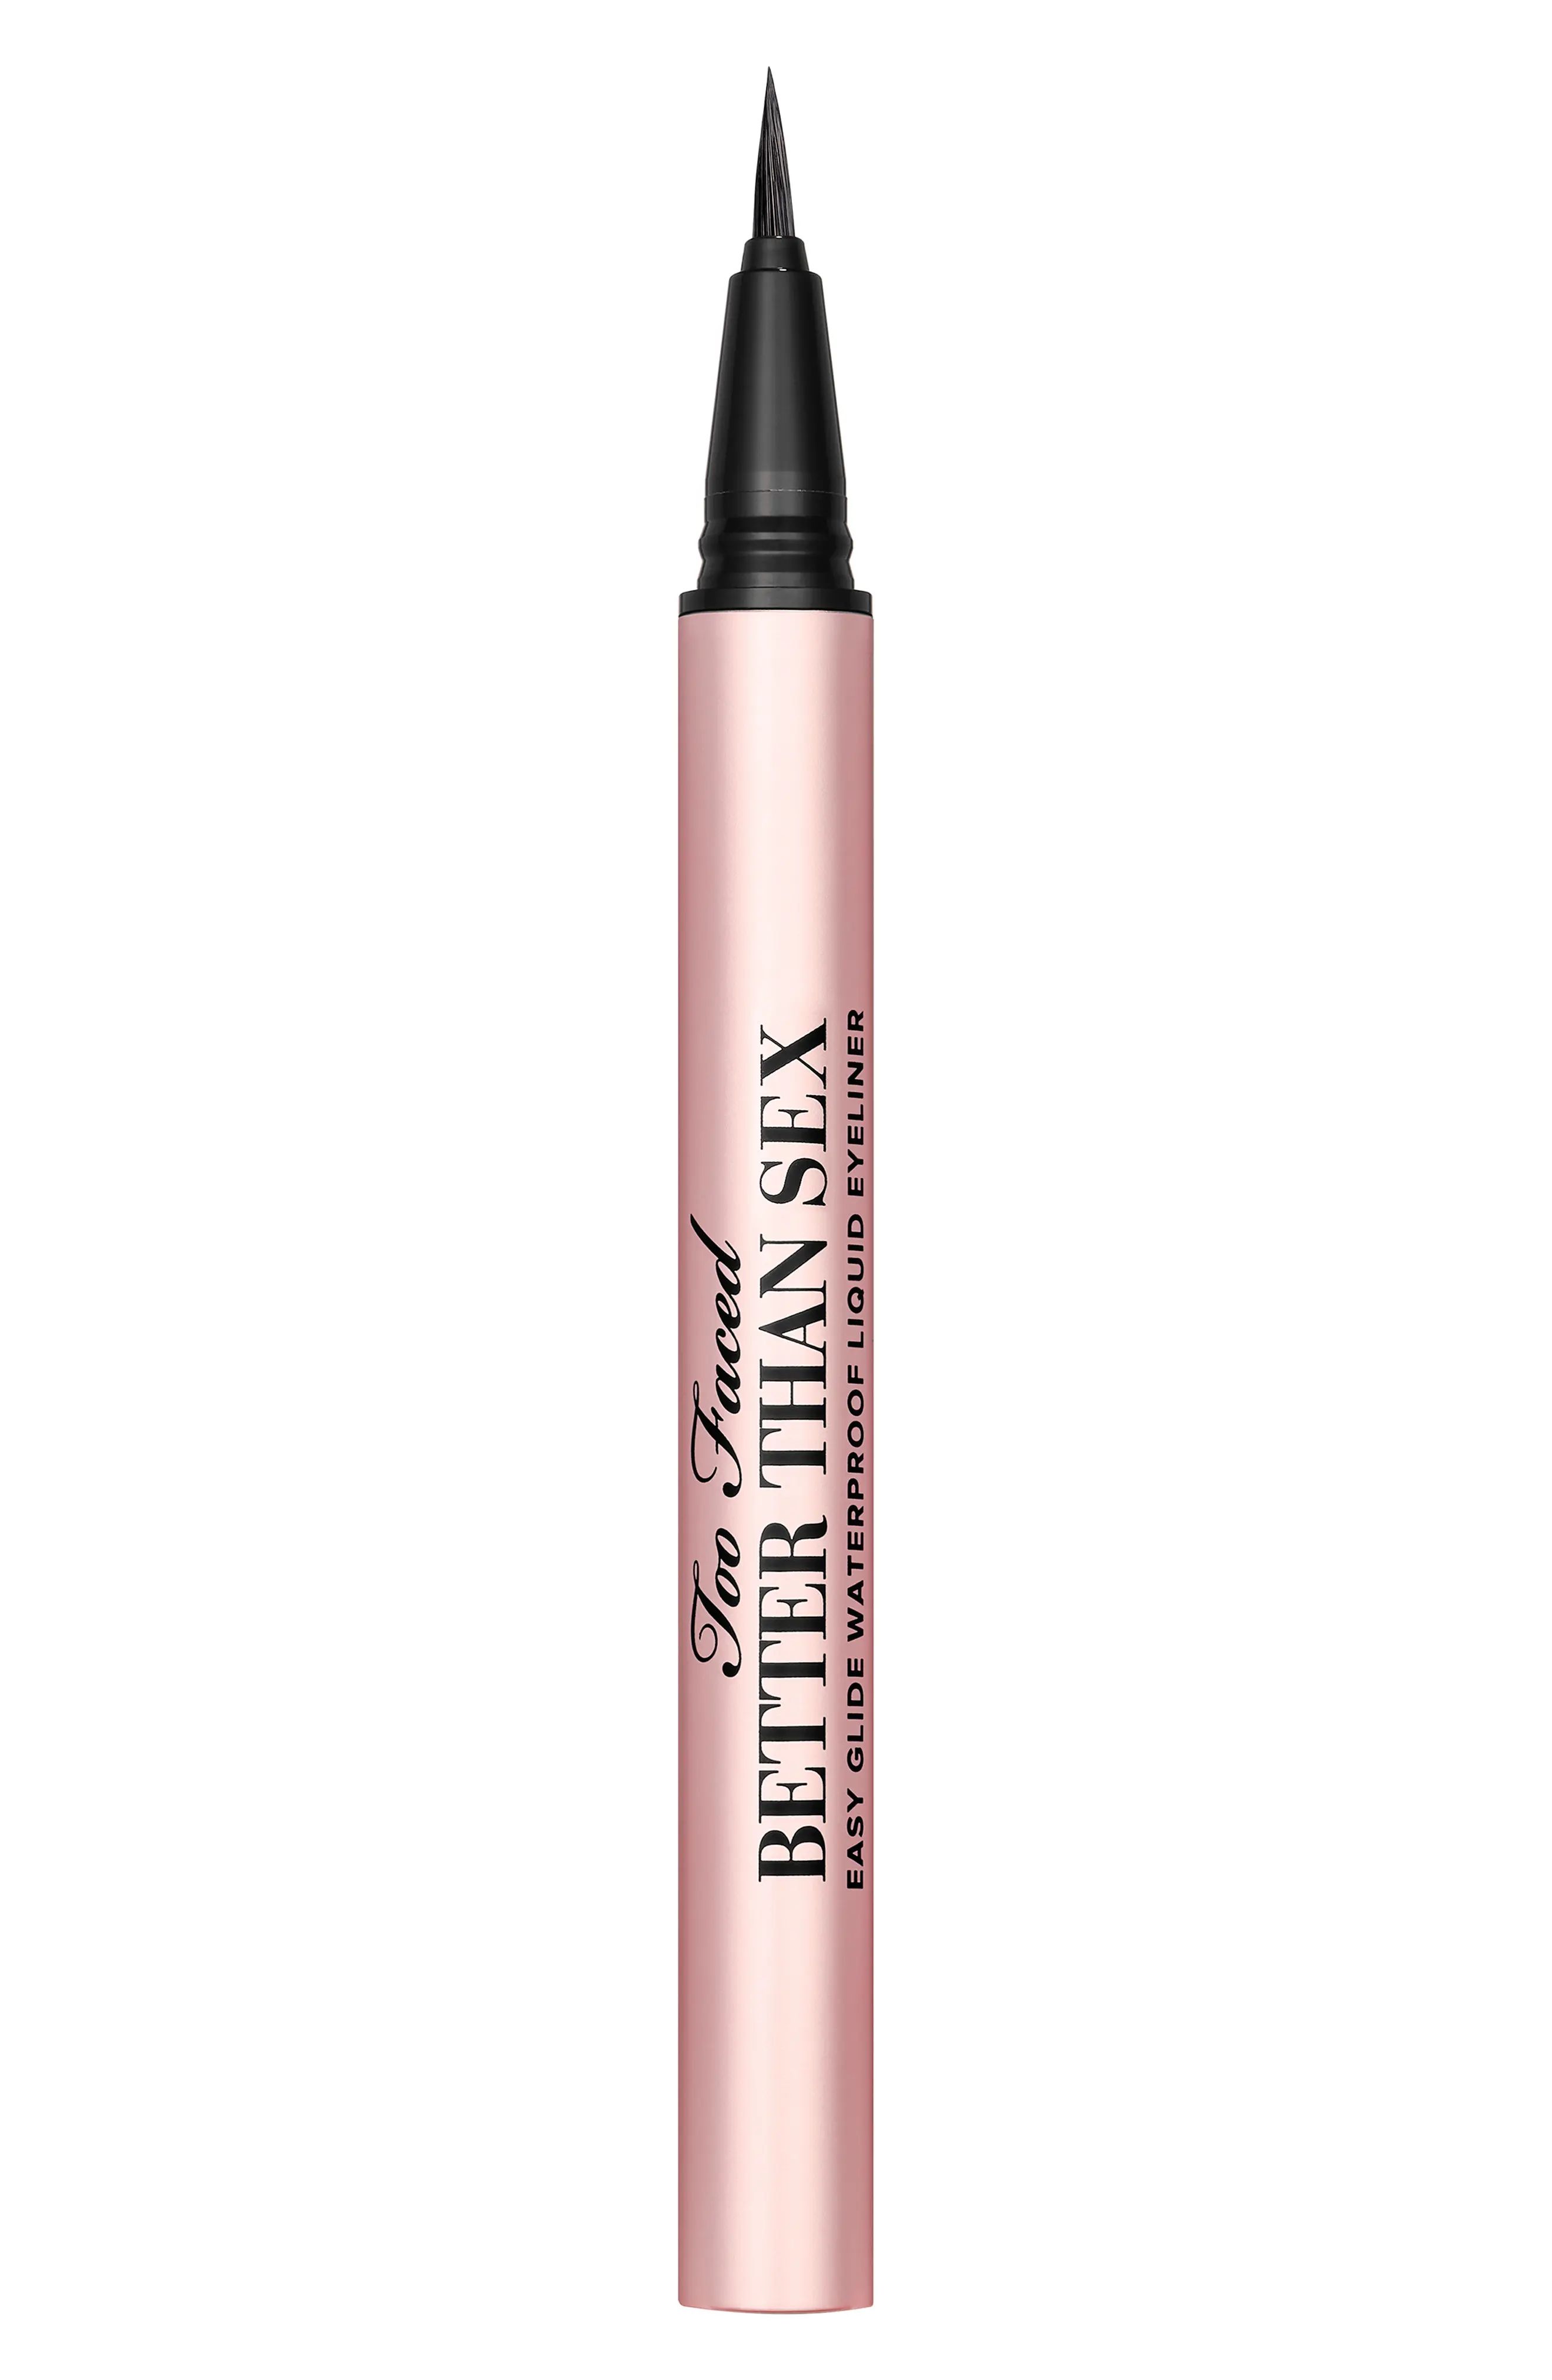 Too Faced Better Than Sex Easy Glide Waterproof Liquid Eyeliner - No Color | Nordstrom